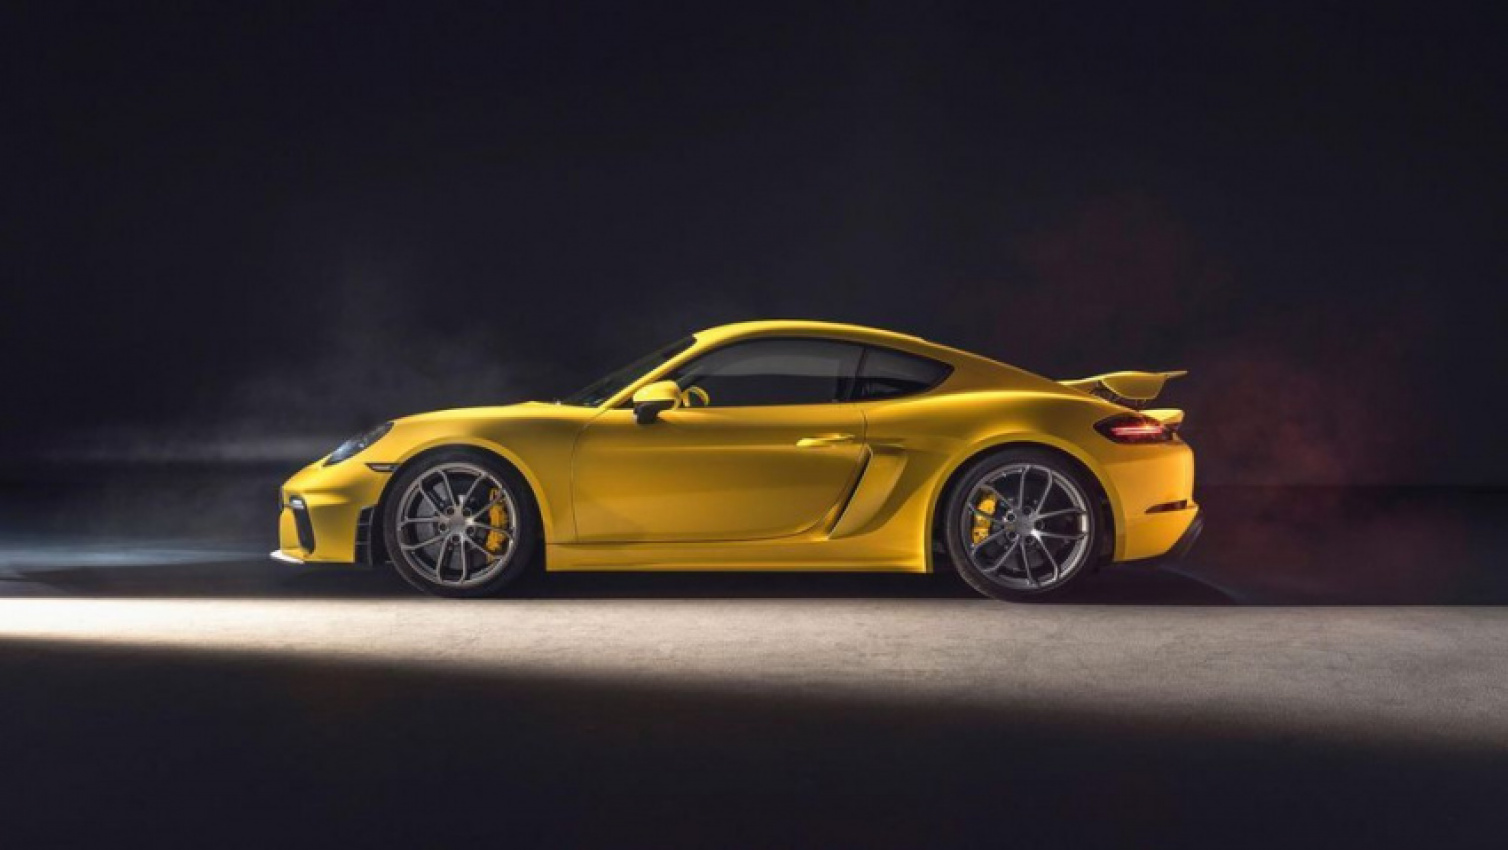 autos, cars, porsche, 718 spyder, auto news, cayman, cayman gt4, porsche 718 cayman gt4, porsche 718 spyder, porsche unveils new 718 spyder and 718 cayman gt4 - 6 speed manual, 0 to 100 in 4.4 seconds